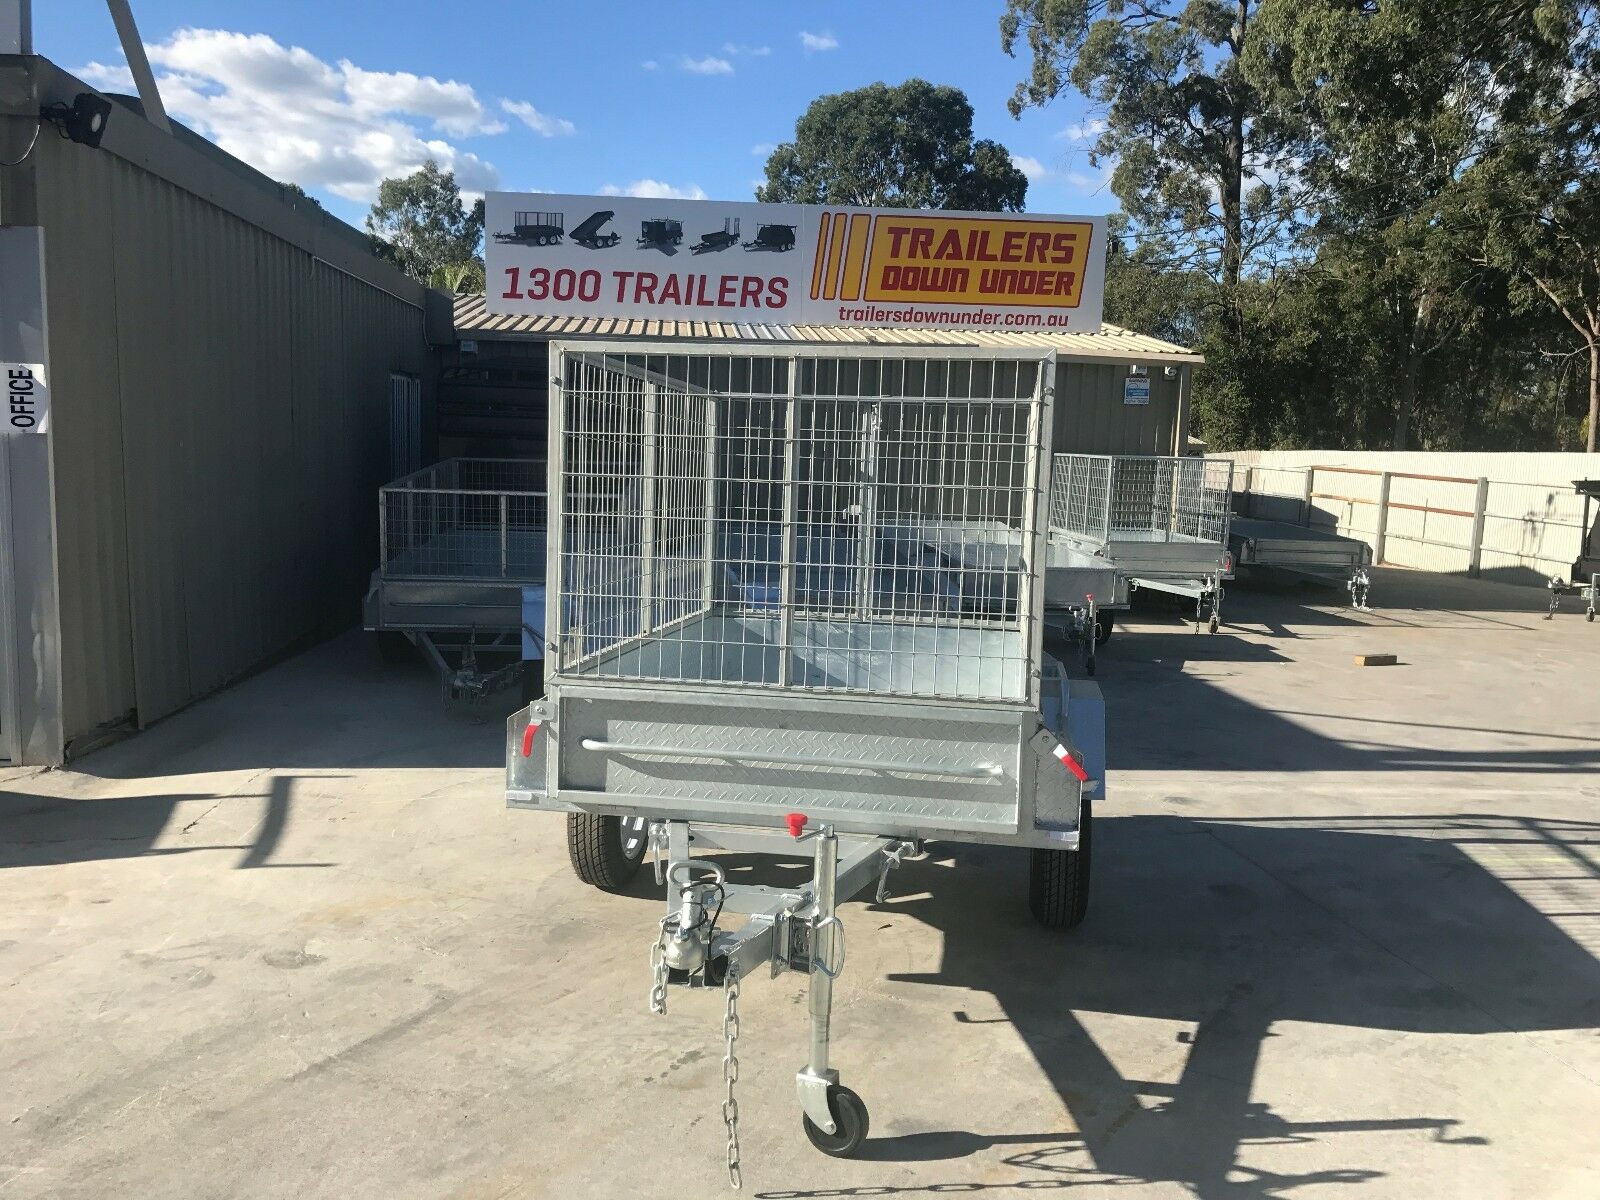 6×4 Galvanised Box Trailer with 2 Ft Cage for Sale in Brisbane<br><br><span class="galv-import">Imported Trailer</span>